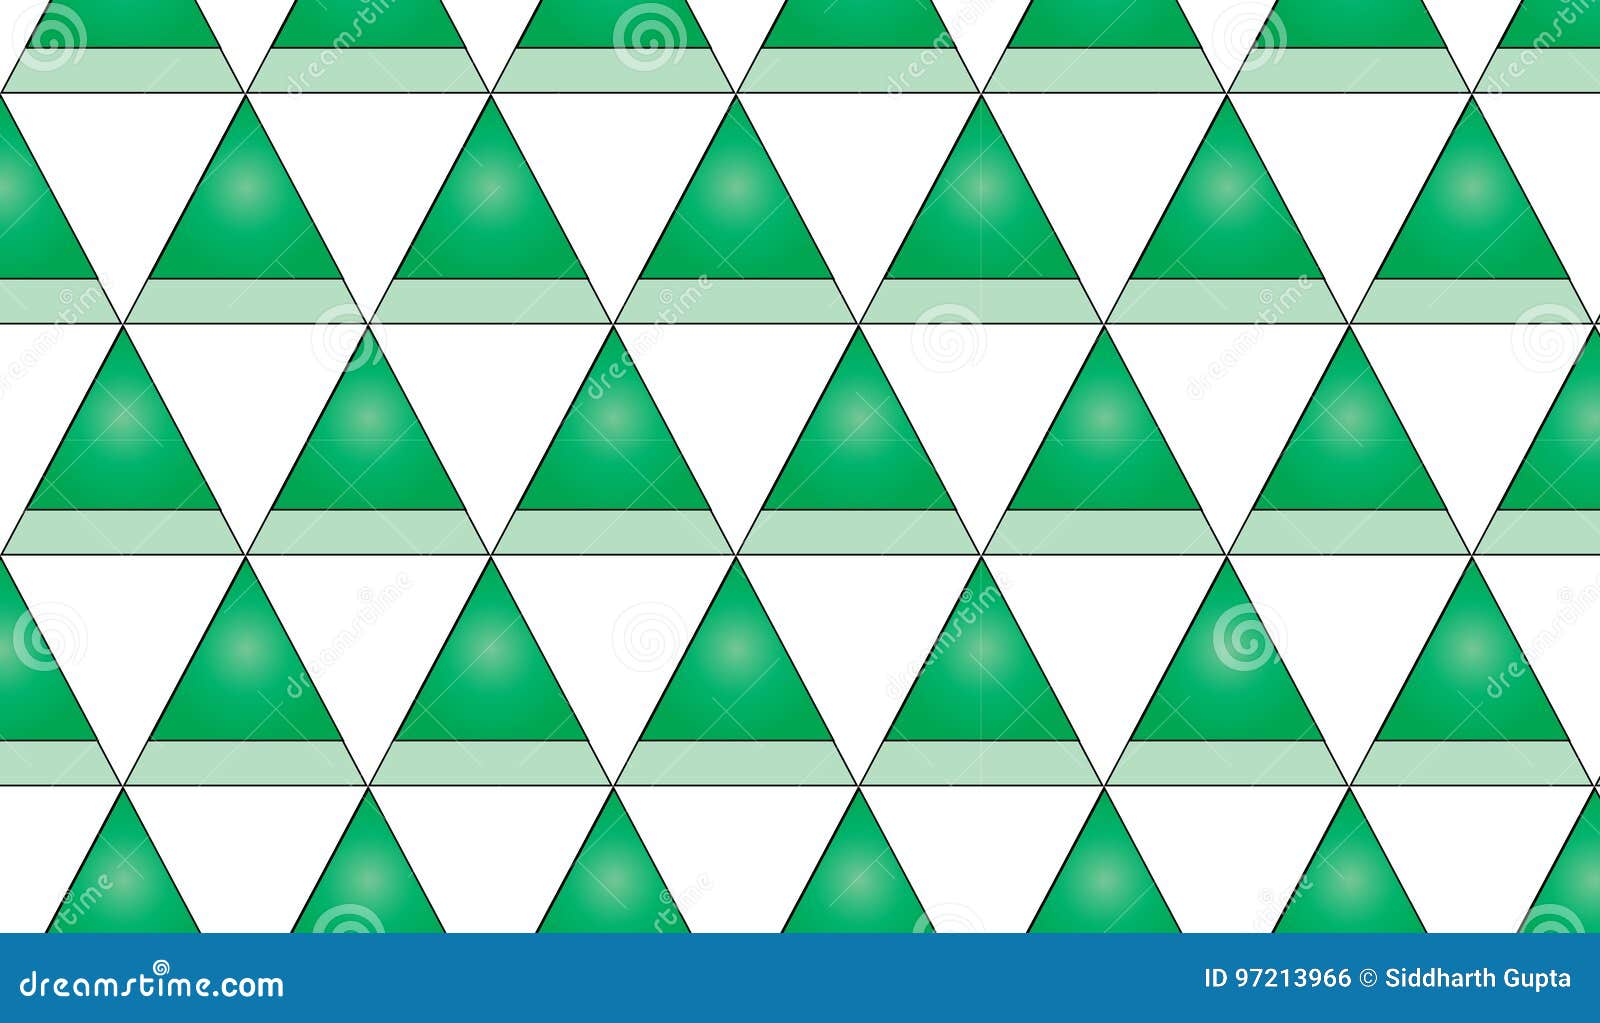 Simple Modern Abstract Green Triangle Checkered Pattern Stock